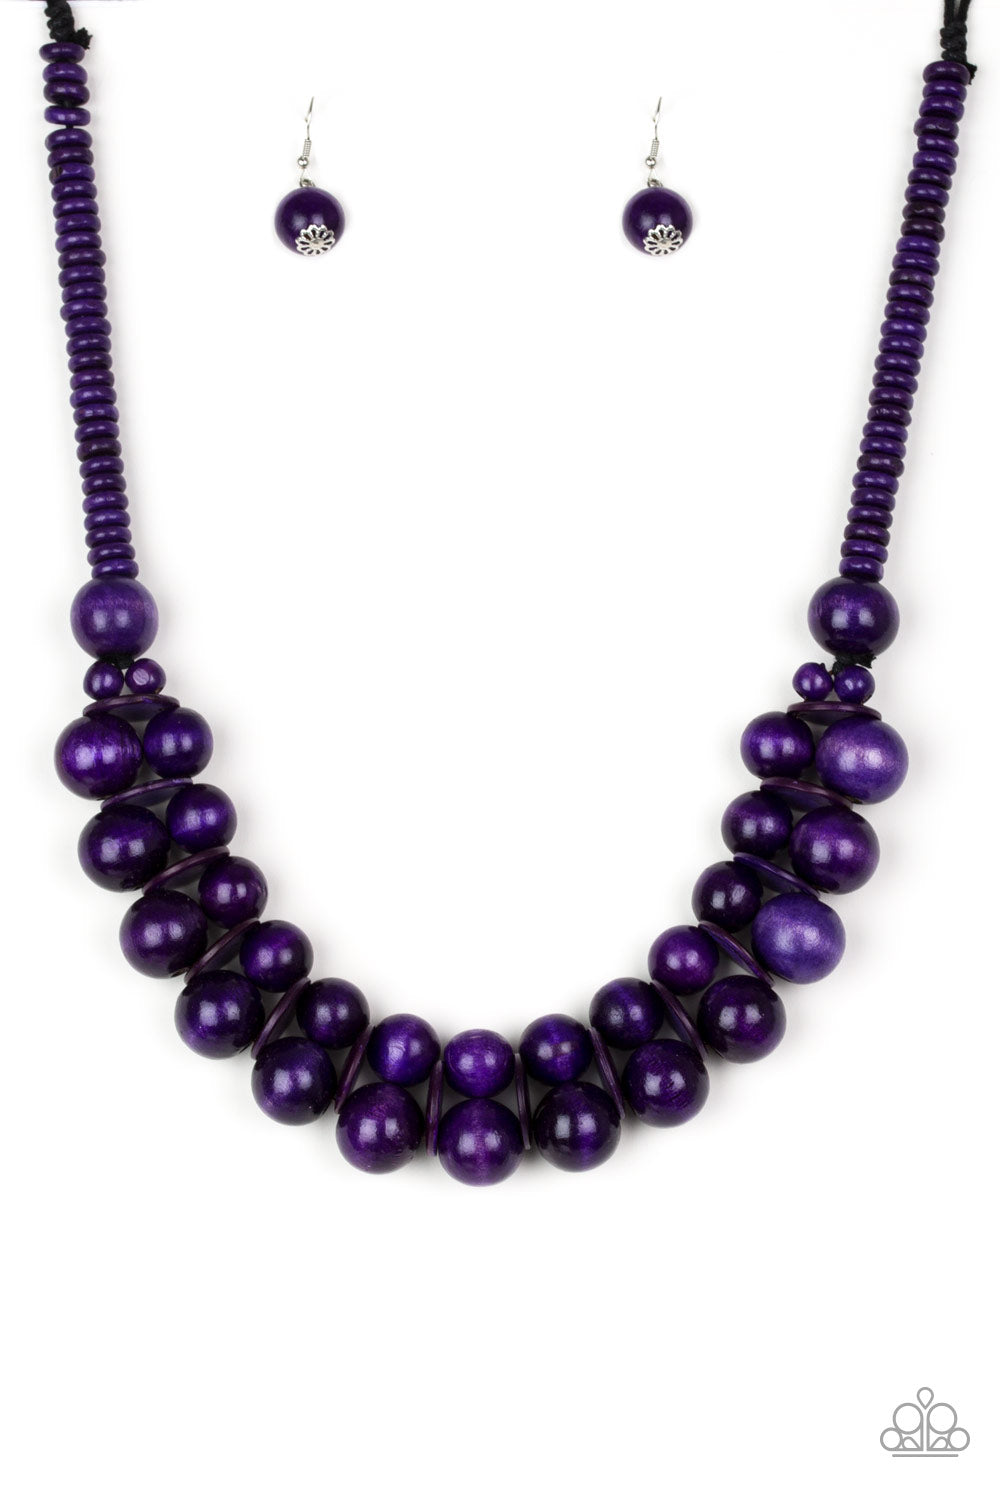 Caribbean Cover Girl Purple Wooden Necklace - Paparazzi Accessories